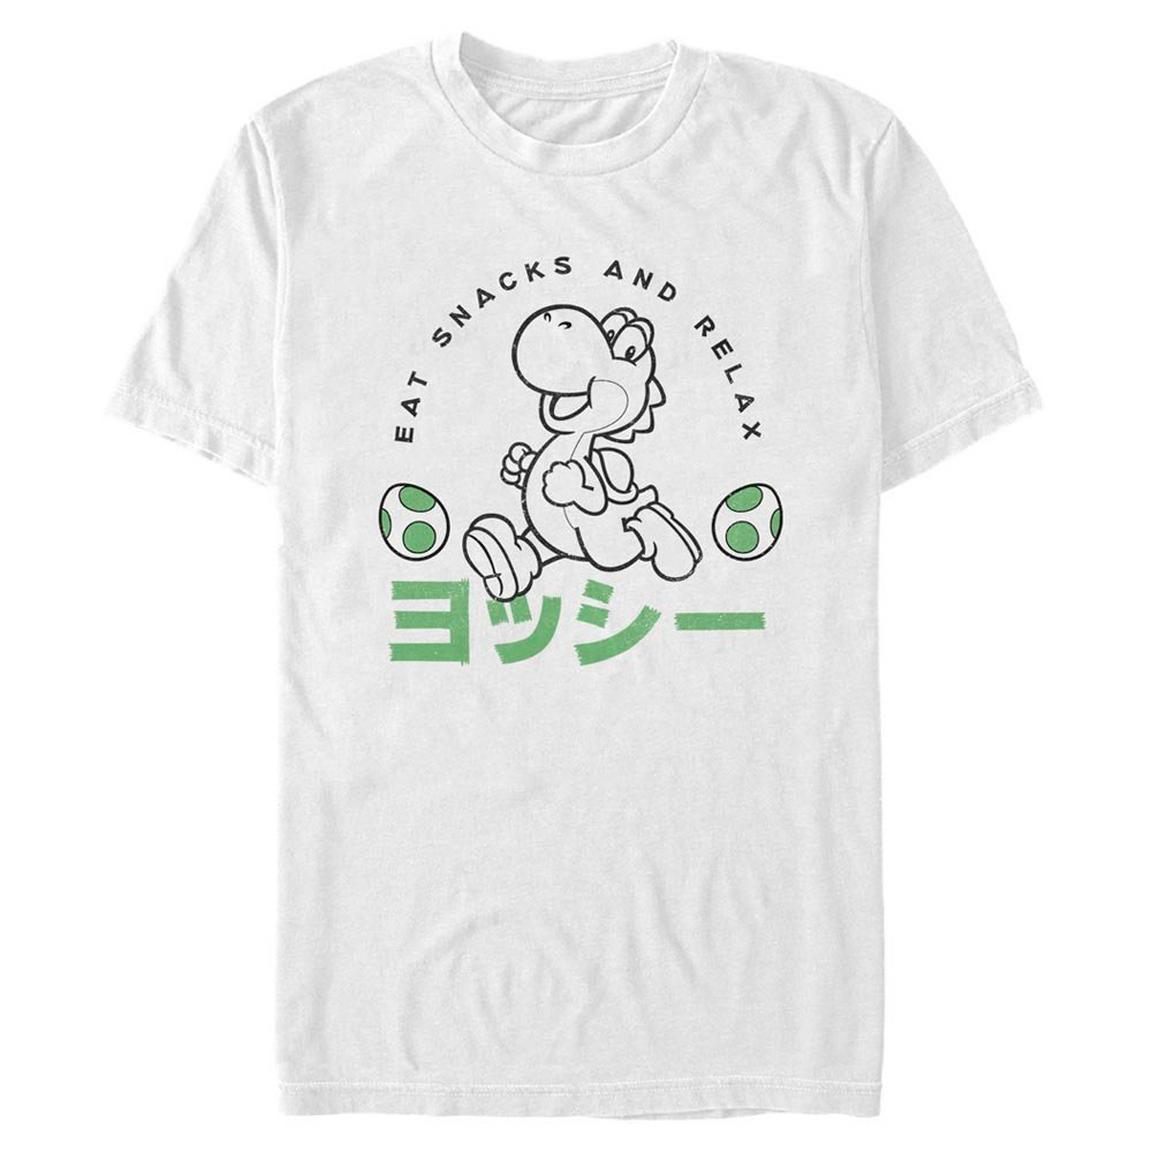 Super Mario Yoshi Eat Snacks and Relax T-Shirt, Size: 3XL, Fifth Sun